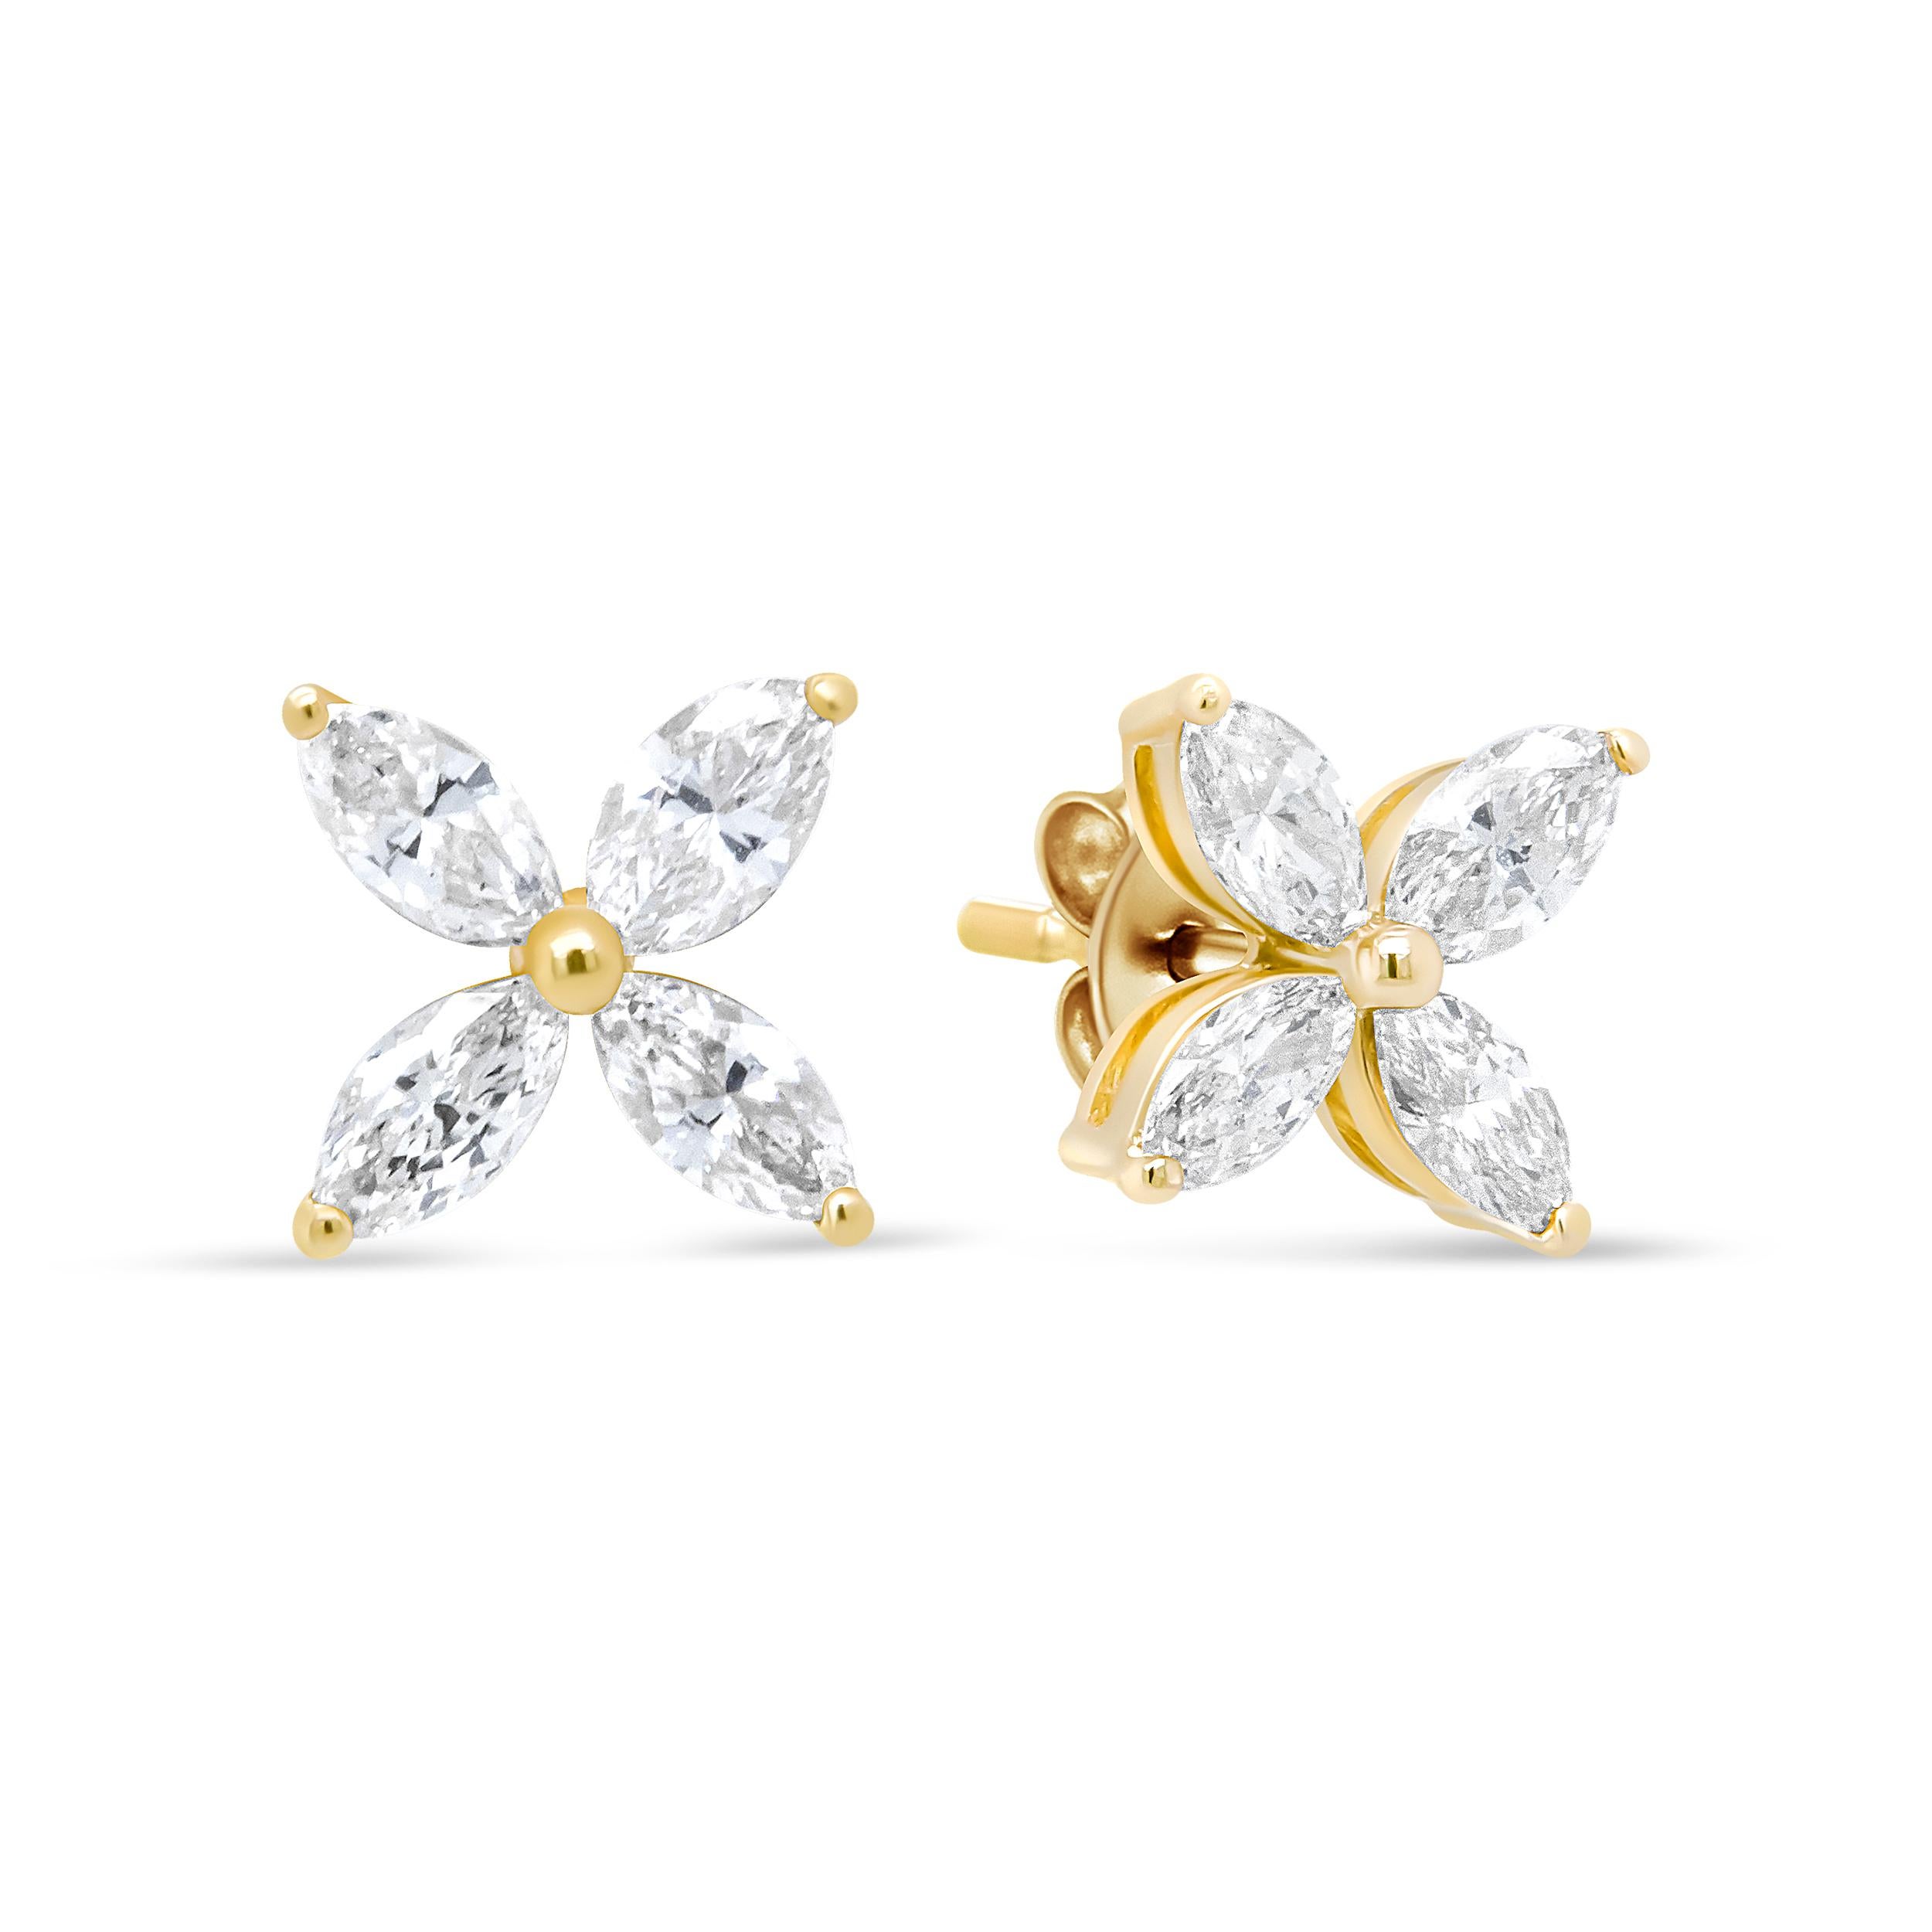 These stunning earrings feature 8 marquise-cut diamonds, totaling 3/4 Cttw. The unique shape of the marquise-cut diamond adds elegance and sophistication to these earrings, making them perfect for any occasion. The diamonds are I-J in color and